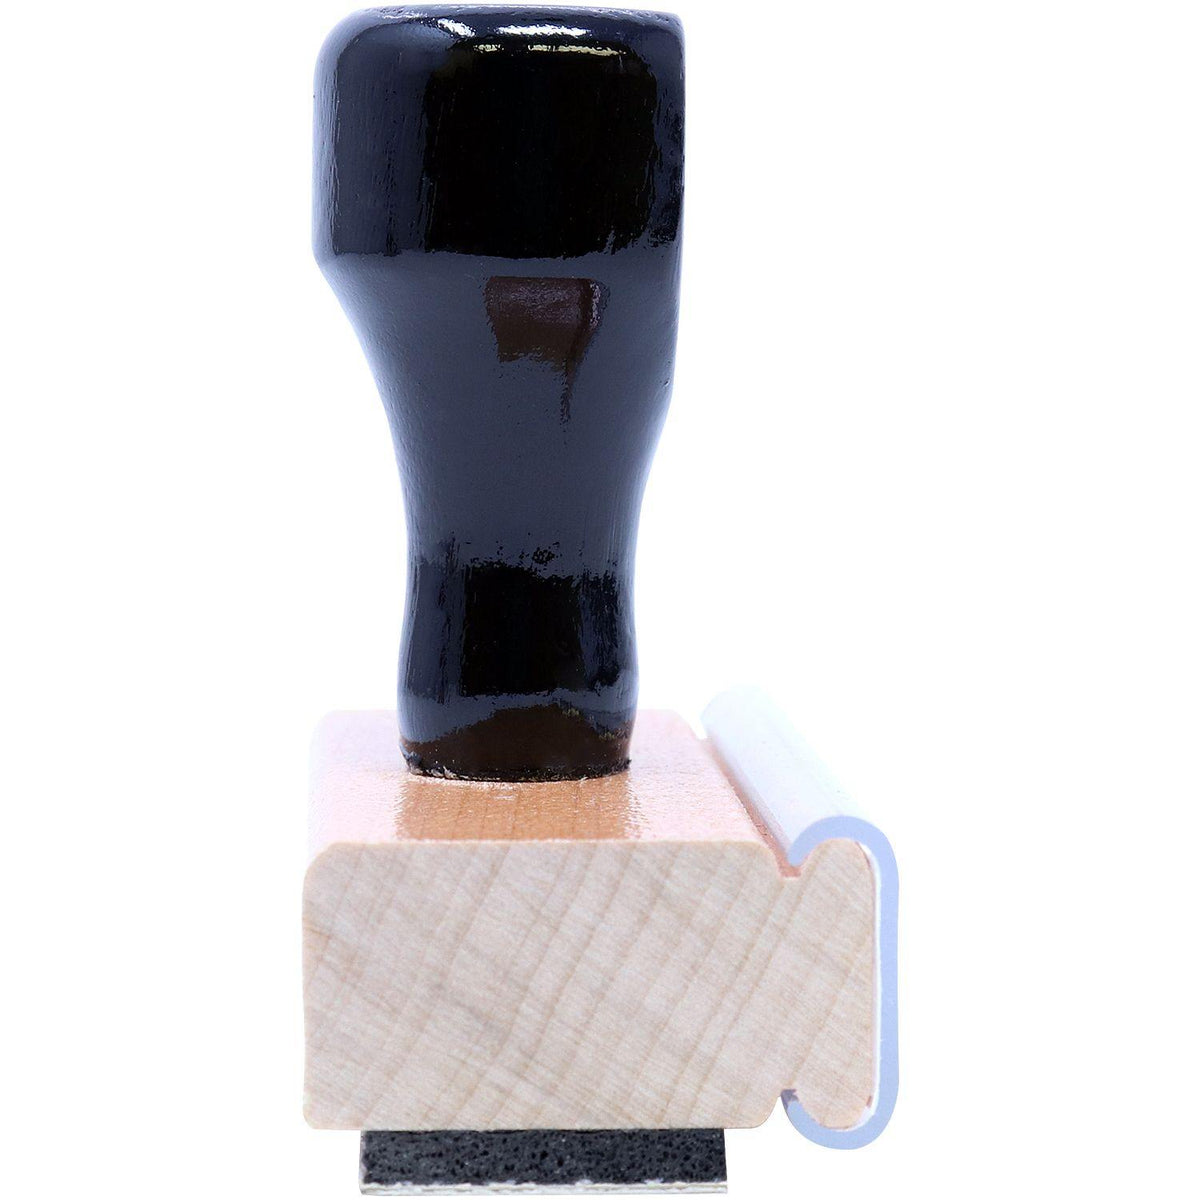 Large Times Faxed Rubber Stamp - Engineer Seal Stamps - Brand_Acorn, Impression Size_Large, Stamp Type_Regular Stamp, Type of Use_Business, Type of Use_Office